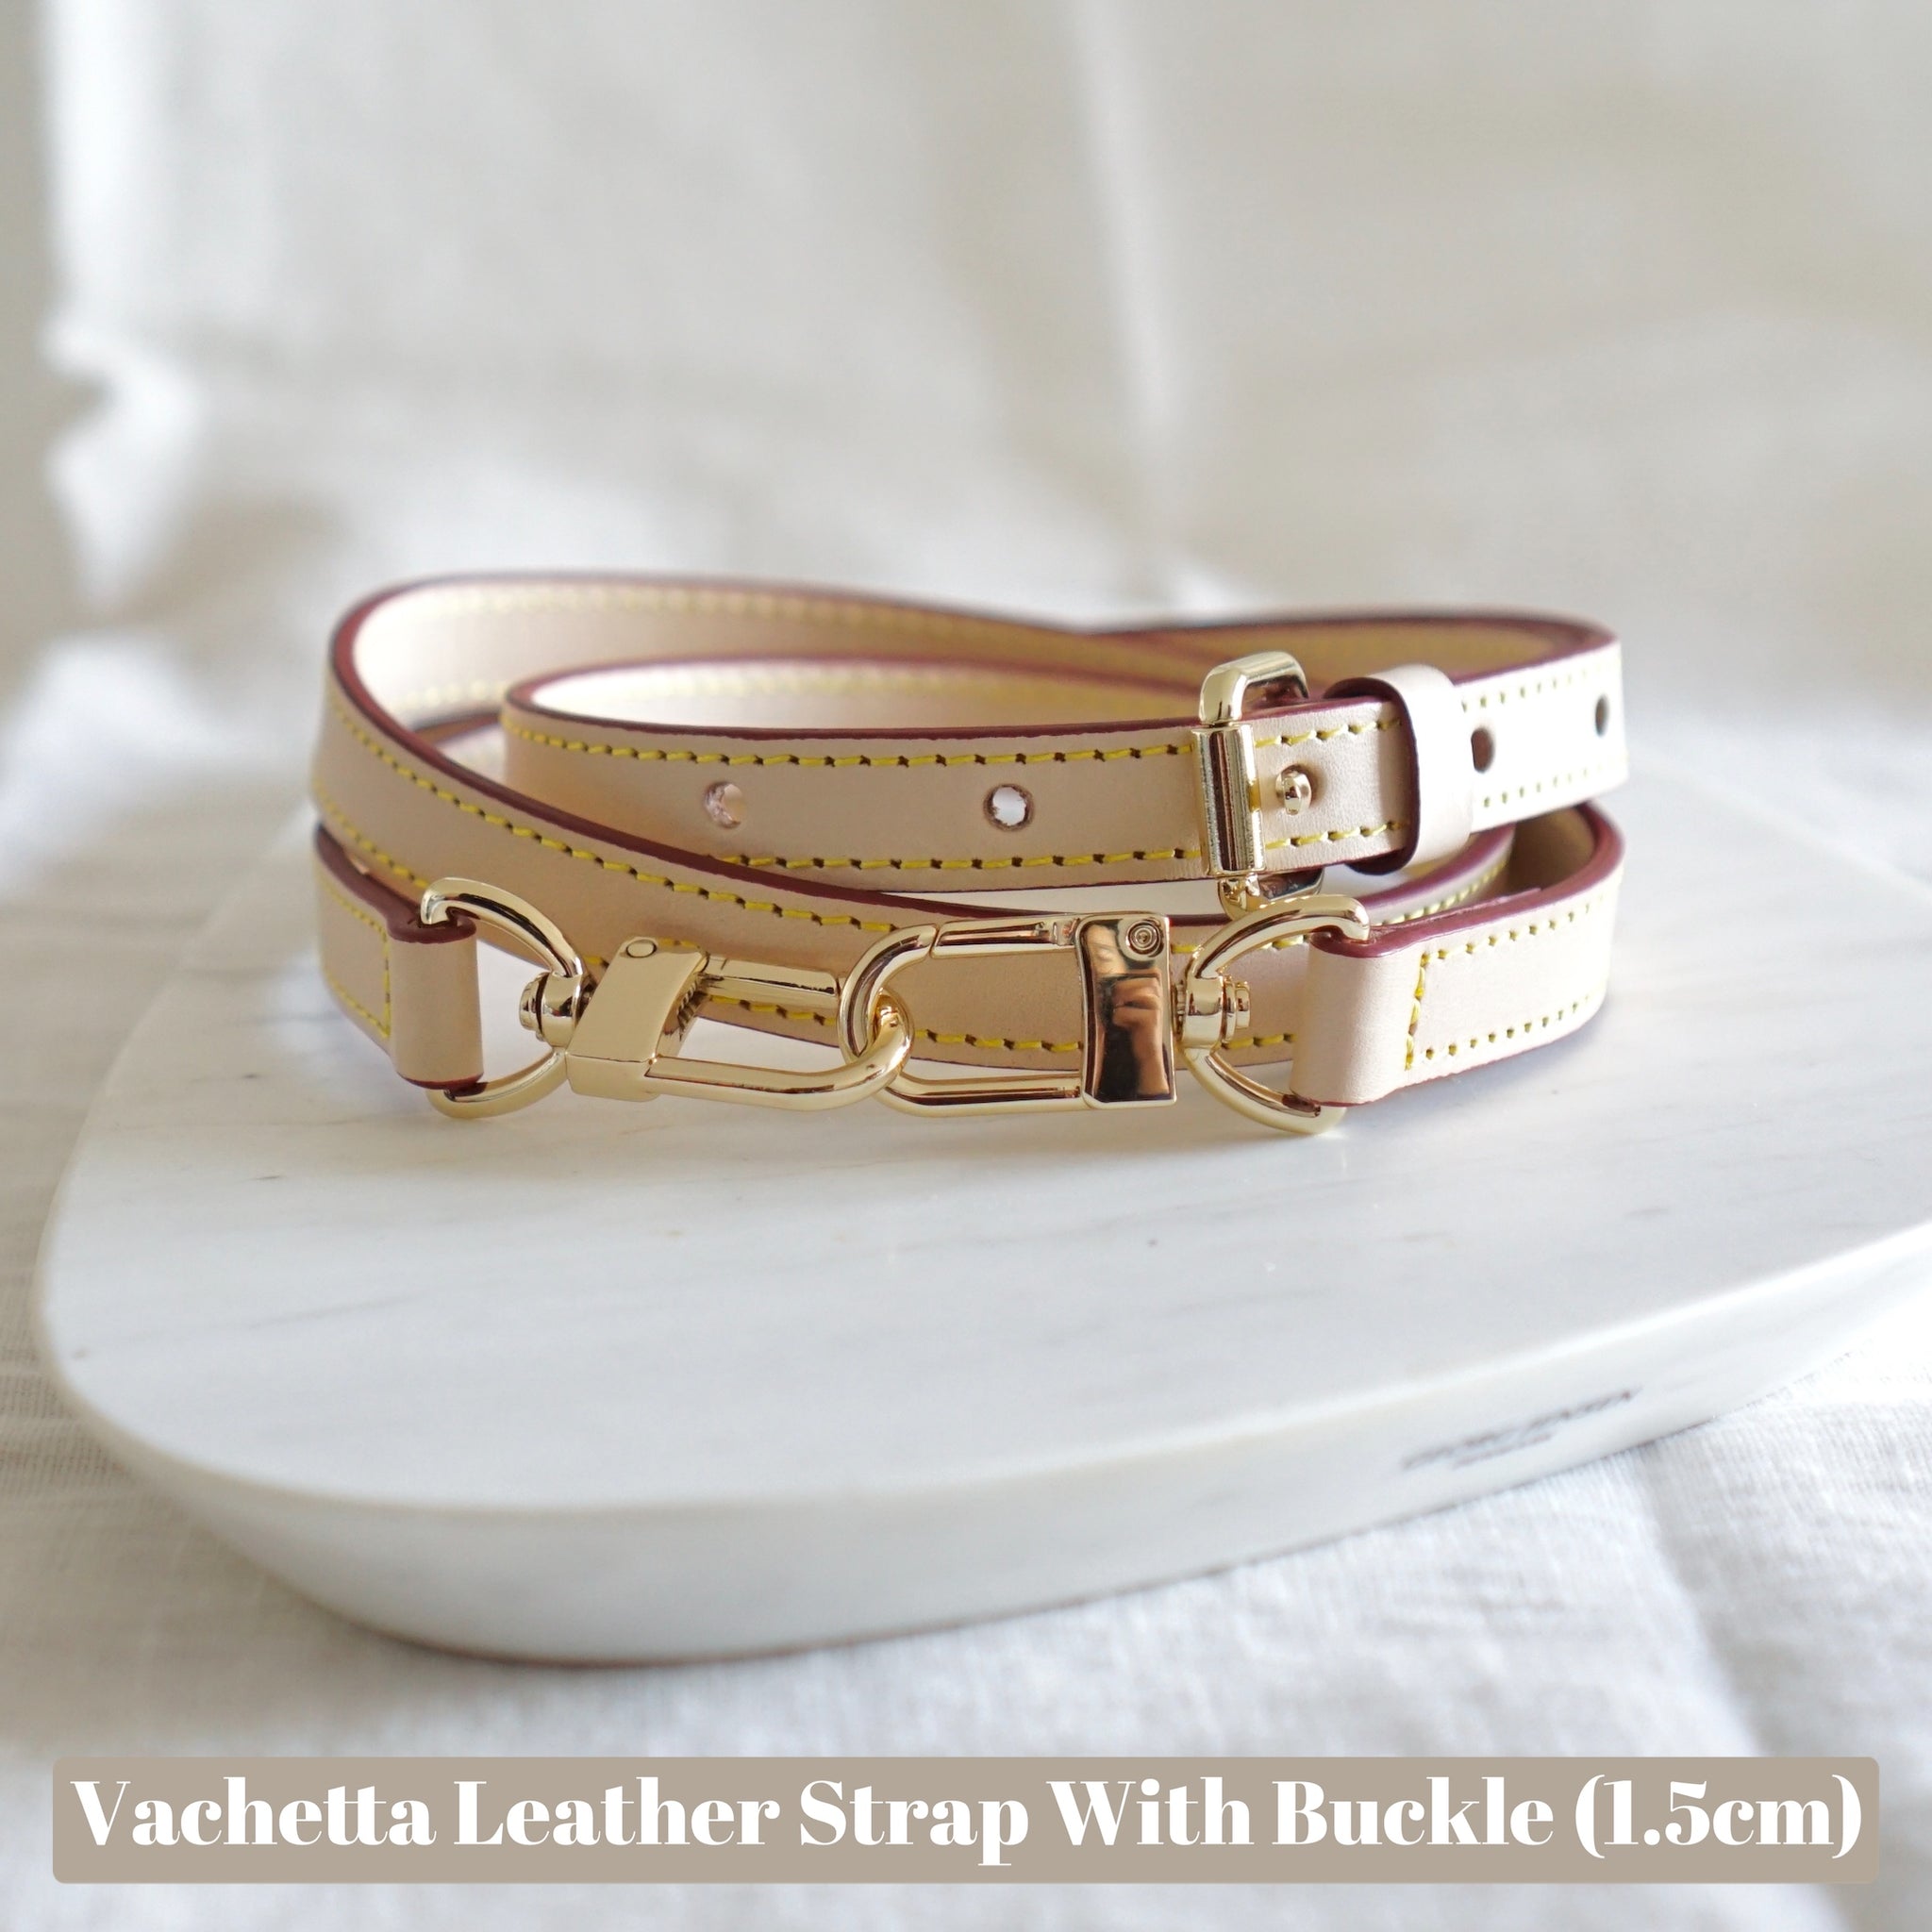 A Louis Vuitton strap replacement Made from vachetta leather then